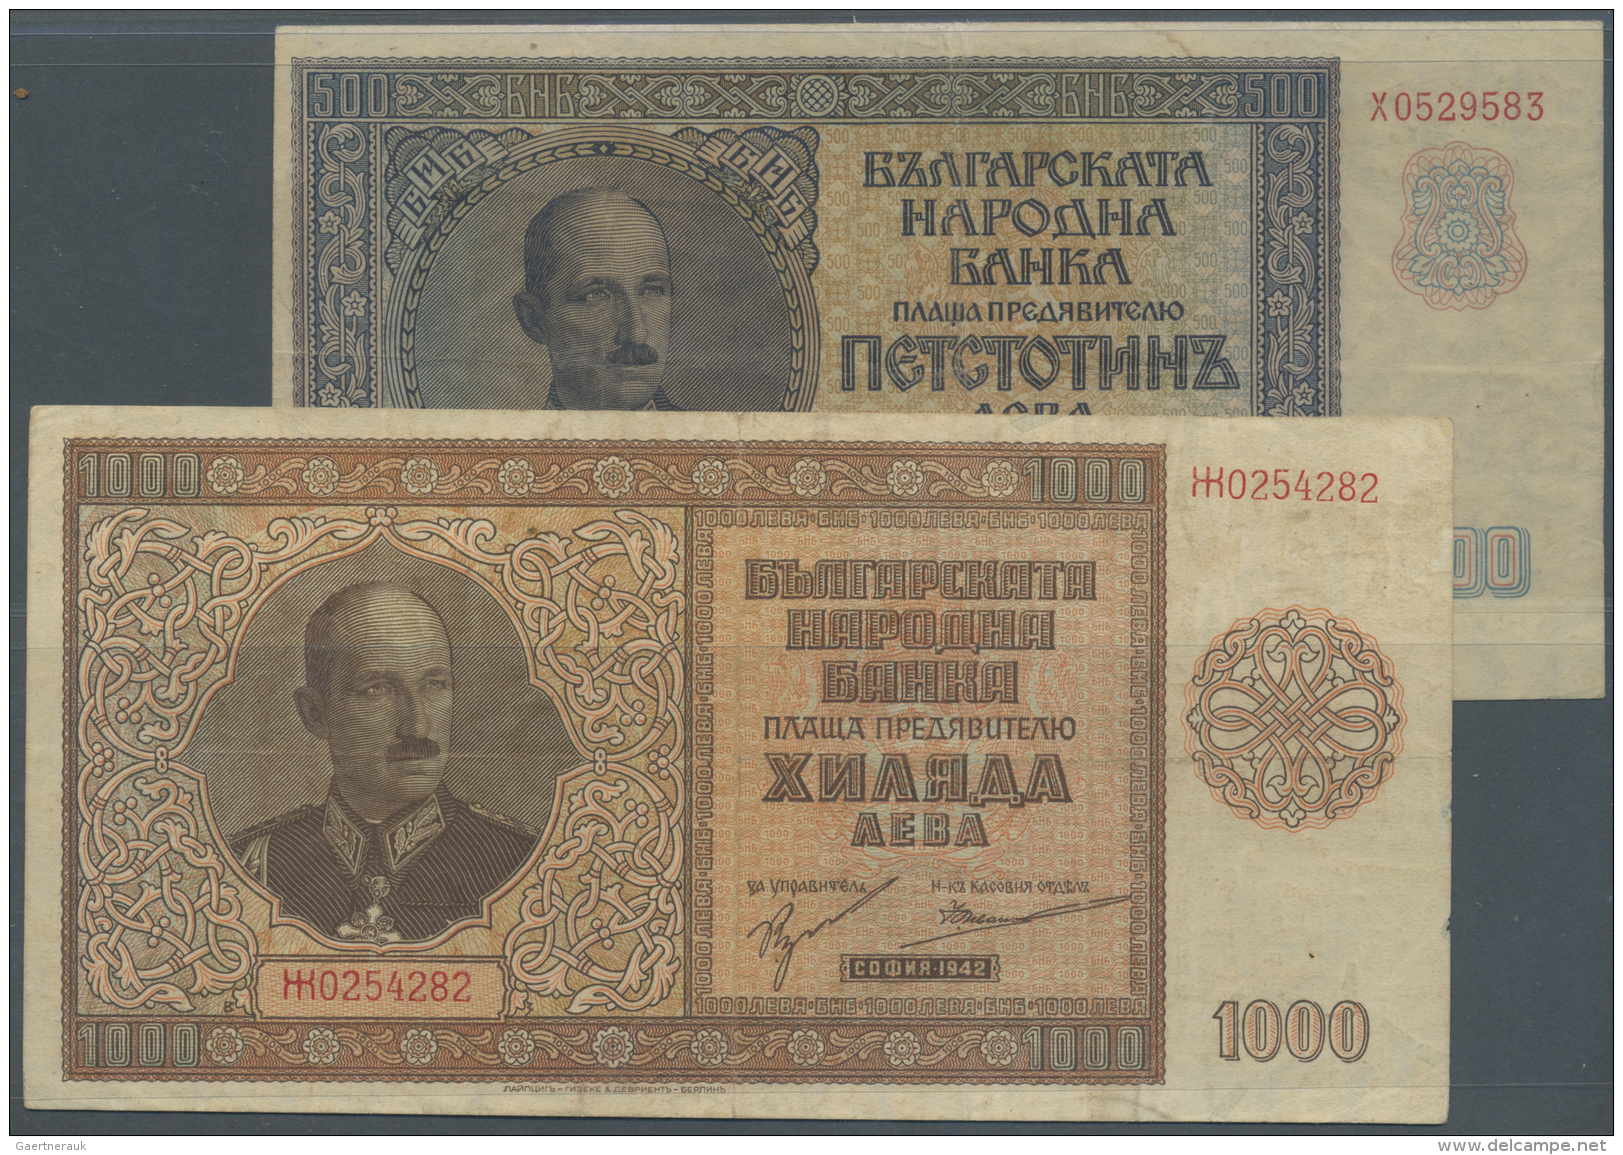 Bulgaria / Bulgarien: Pair With 500 And 1000 Leva 1942, P.60, 61, Both In Used Condition With Several Folds And Stained - Bulgarie